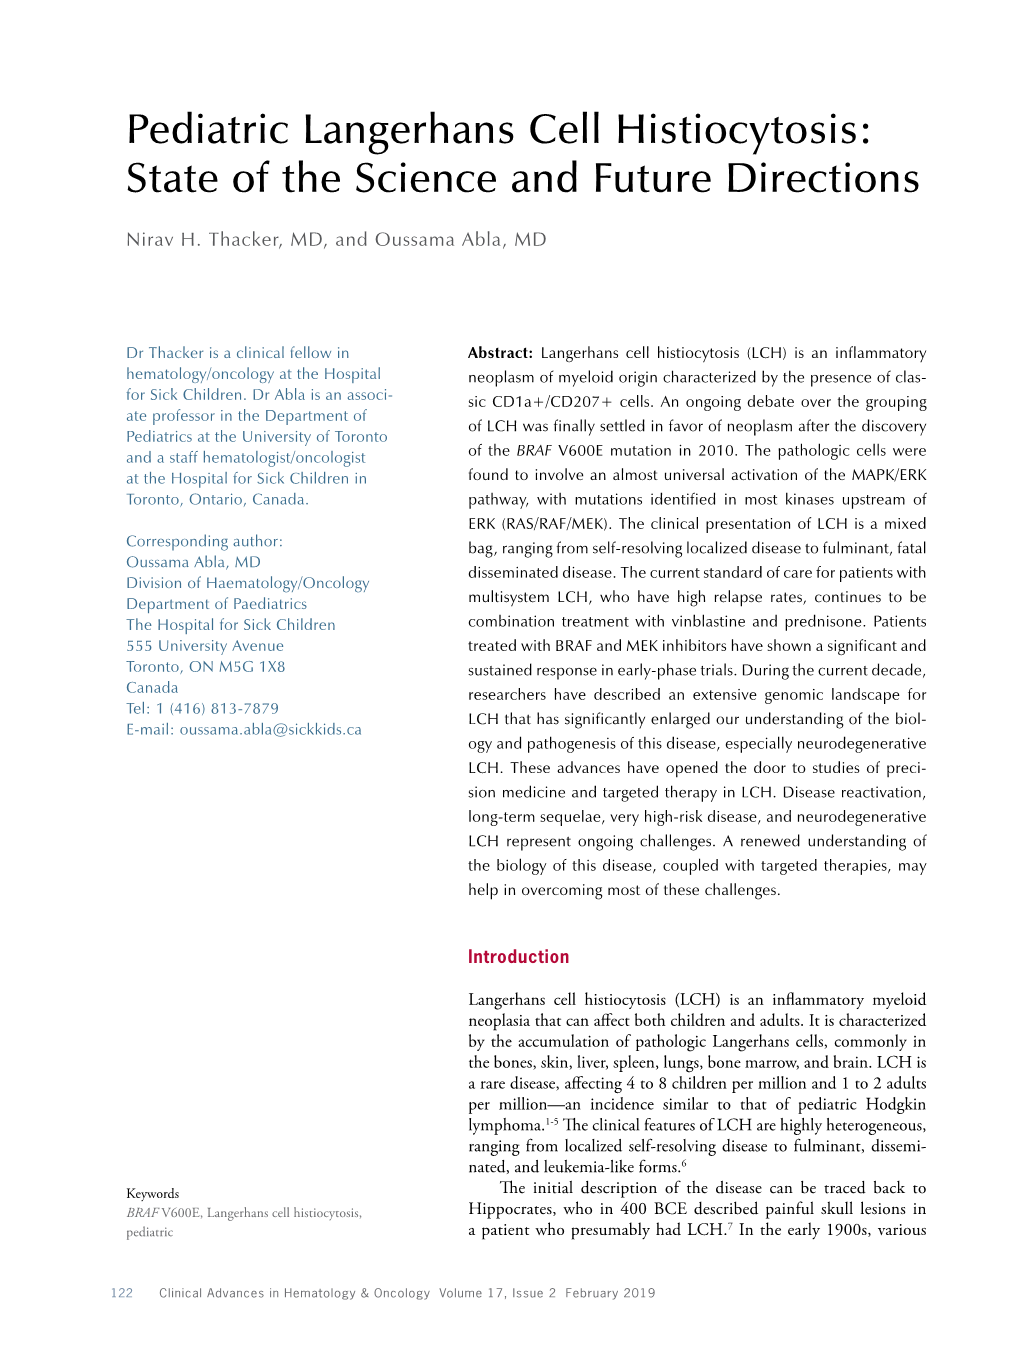 Pediatric Langerhans Cell Histiocytosis: State of the Science and Future Directions